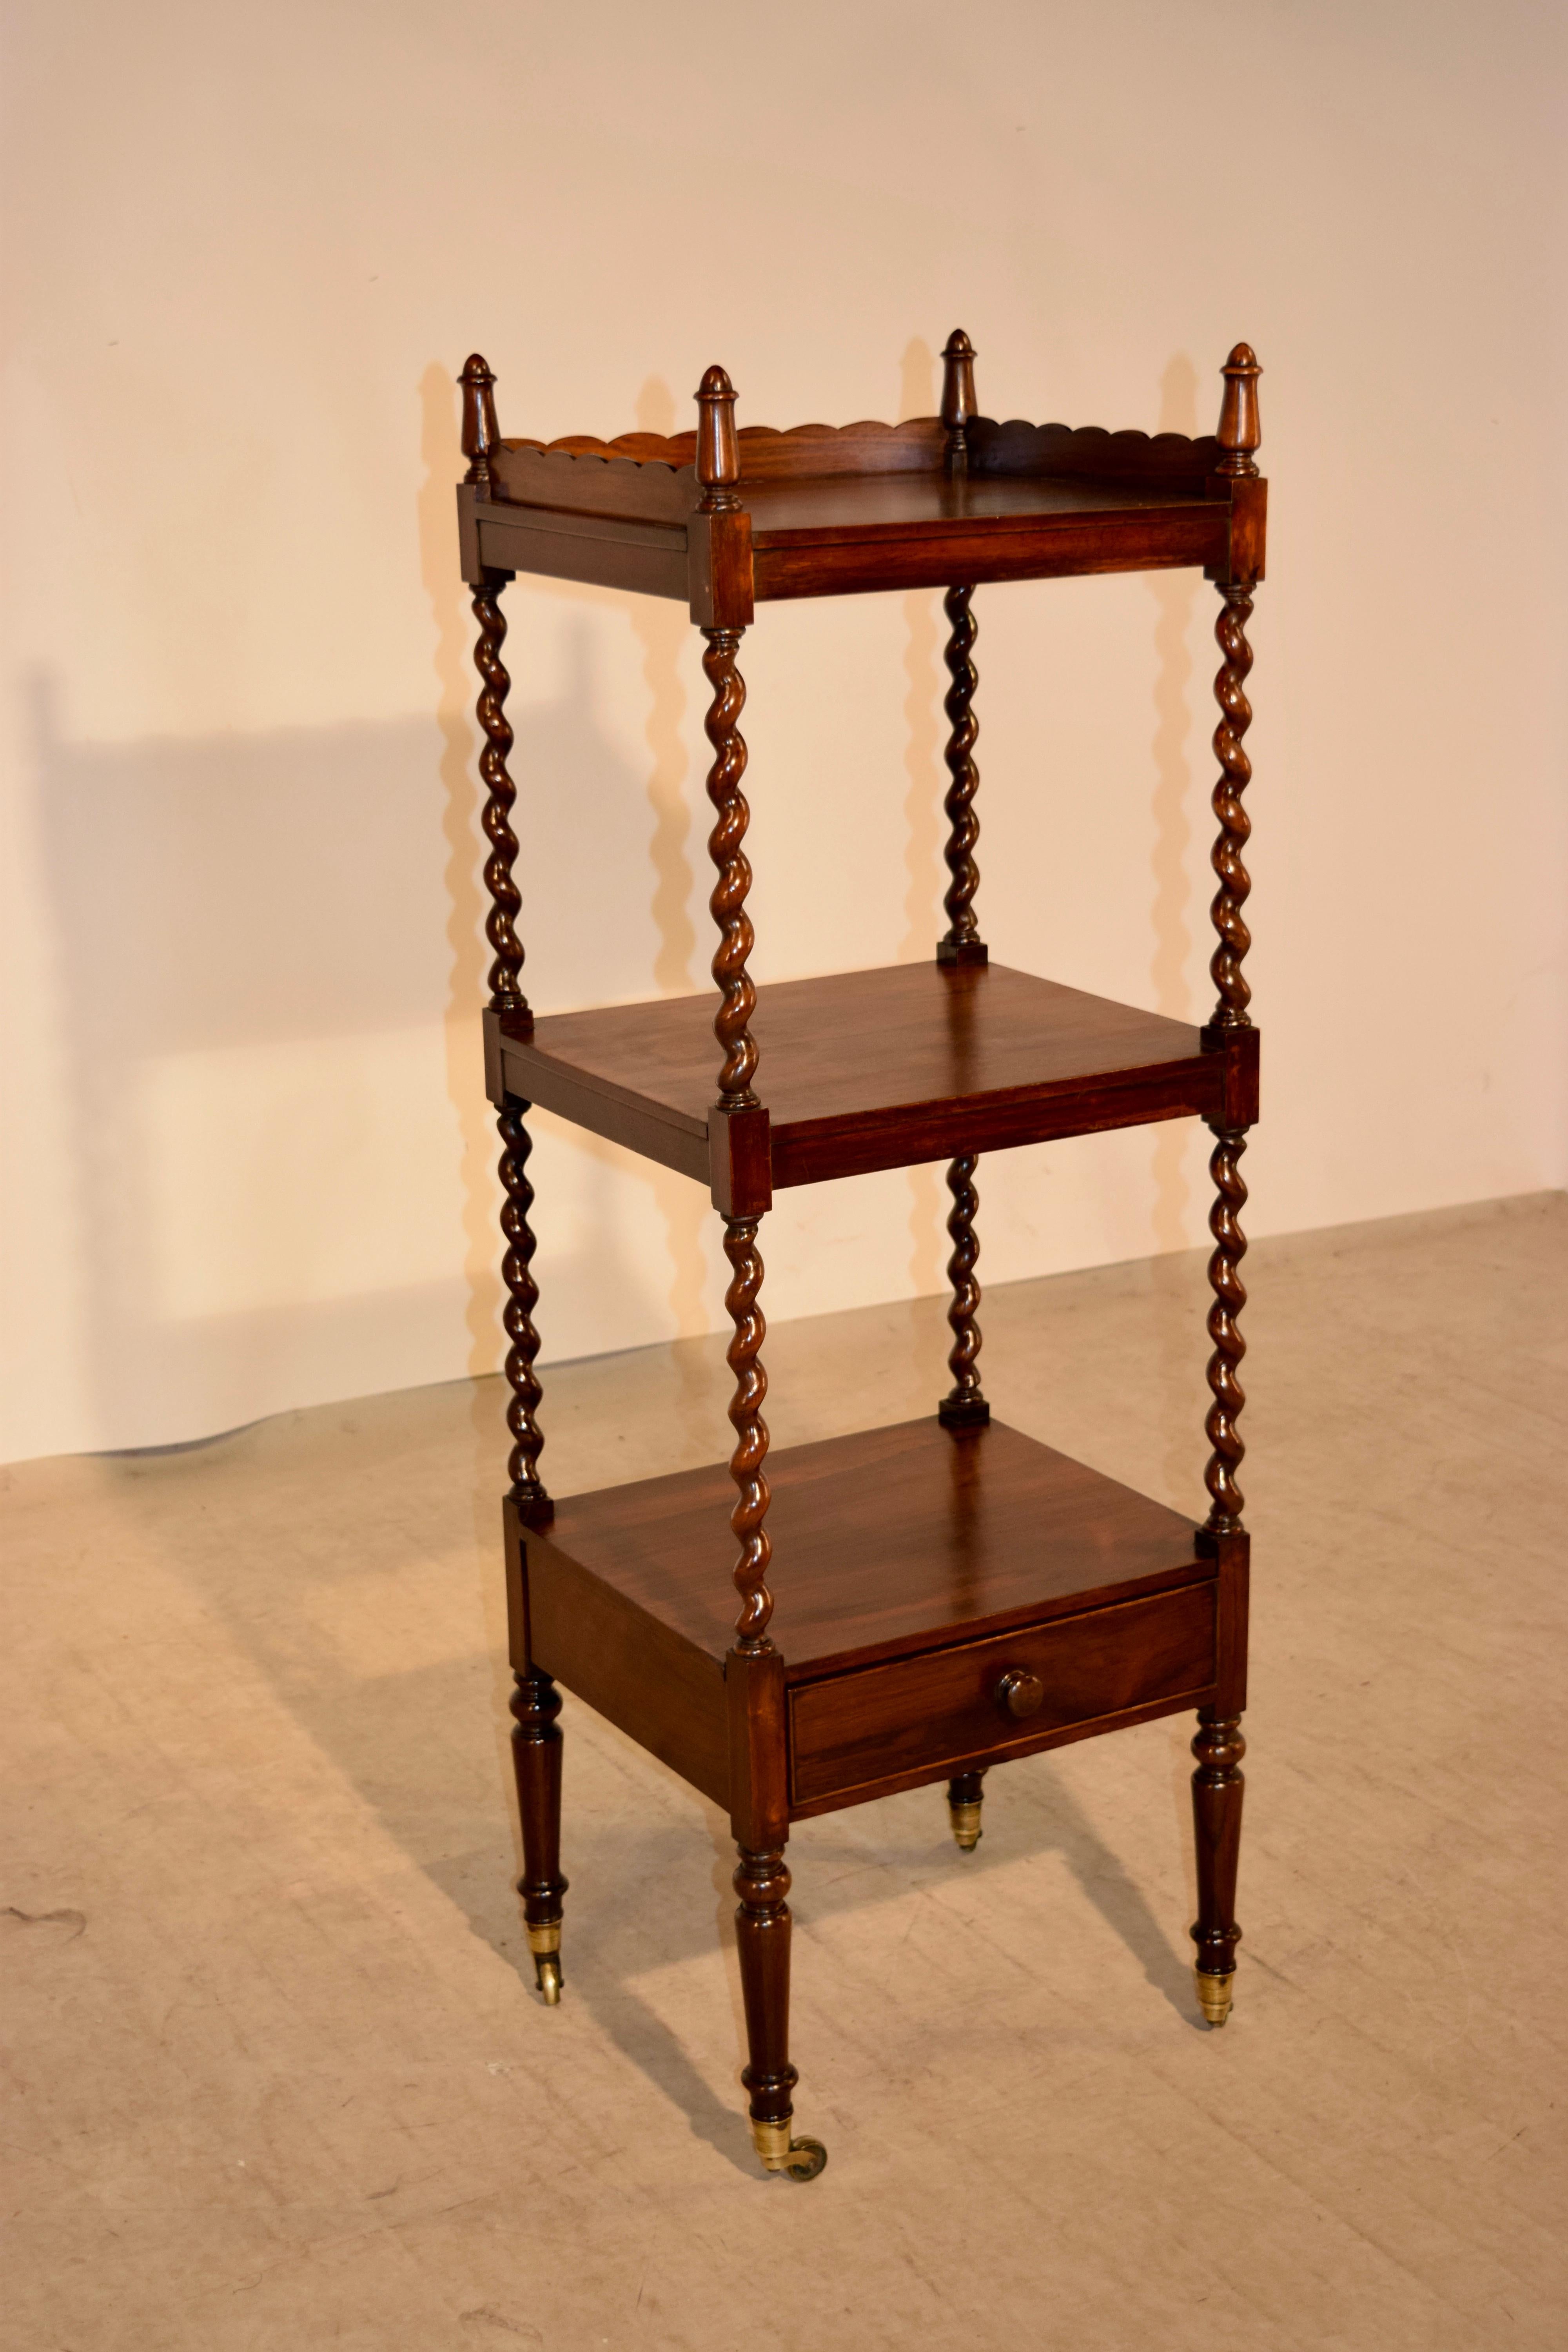 19th century English étagère made from rosewood. The top is decorated with finials and a lovely scalloped gallery following down to three shelves, separated by hand-turned barley twist shelf supports. The third shelf has a drawer below. The piece is